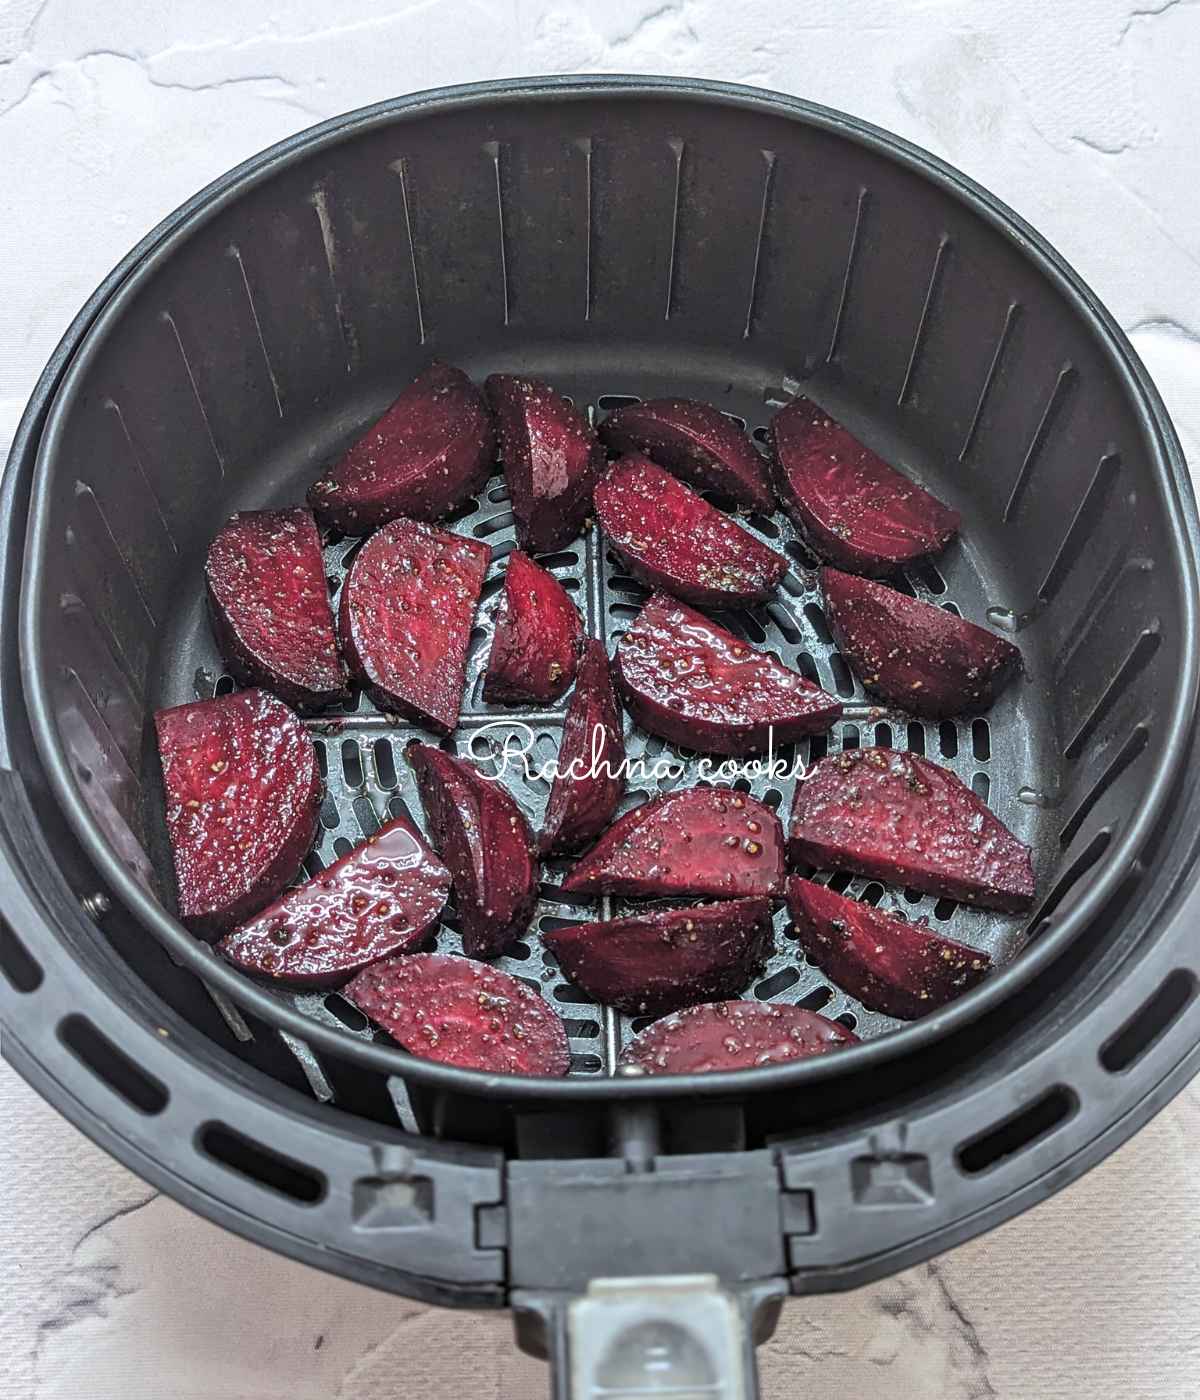 Beets placed in air fryer for roasting